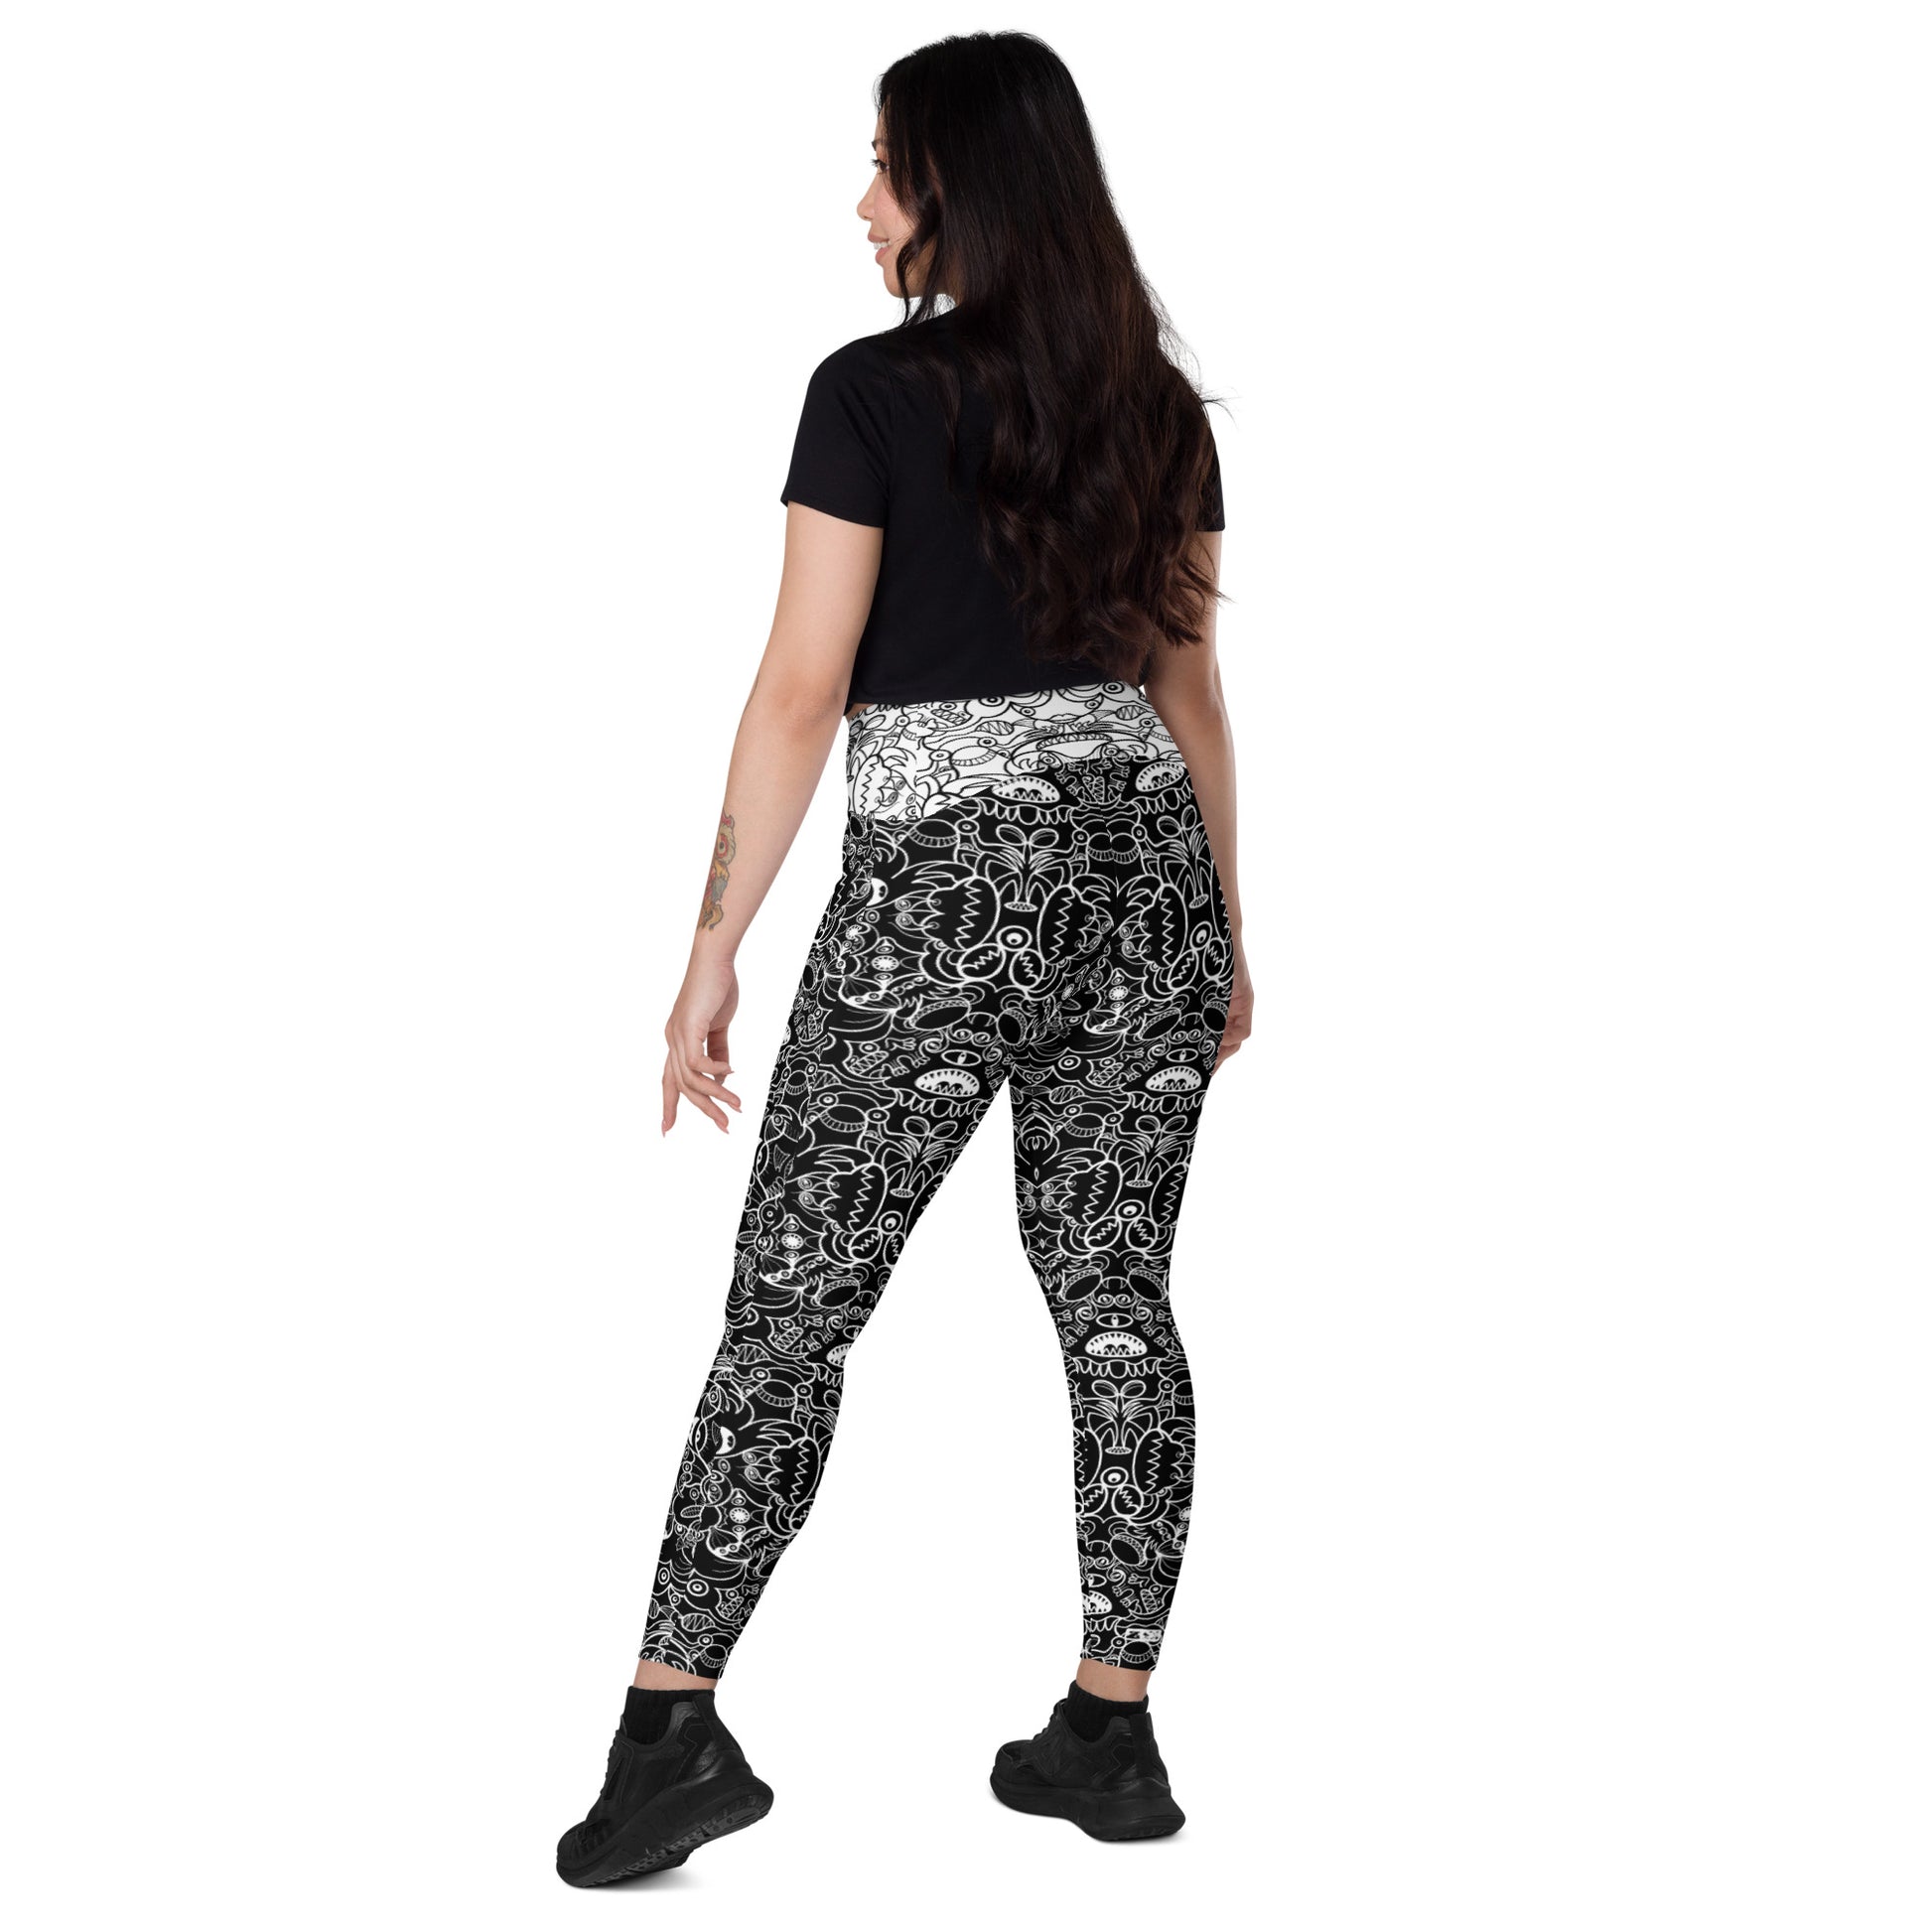 The powerful dark side of the Doodle world Crossover leggings with pockets. Back view